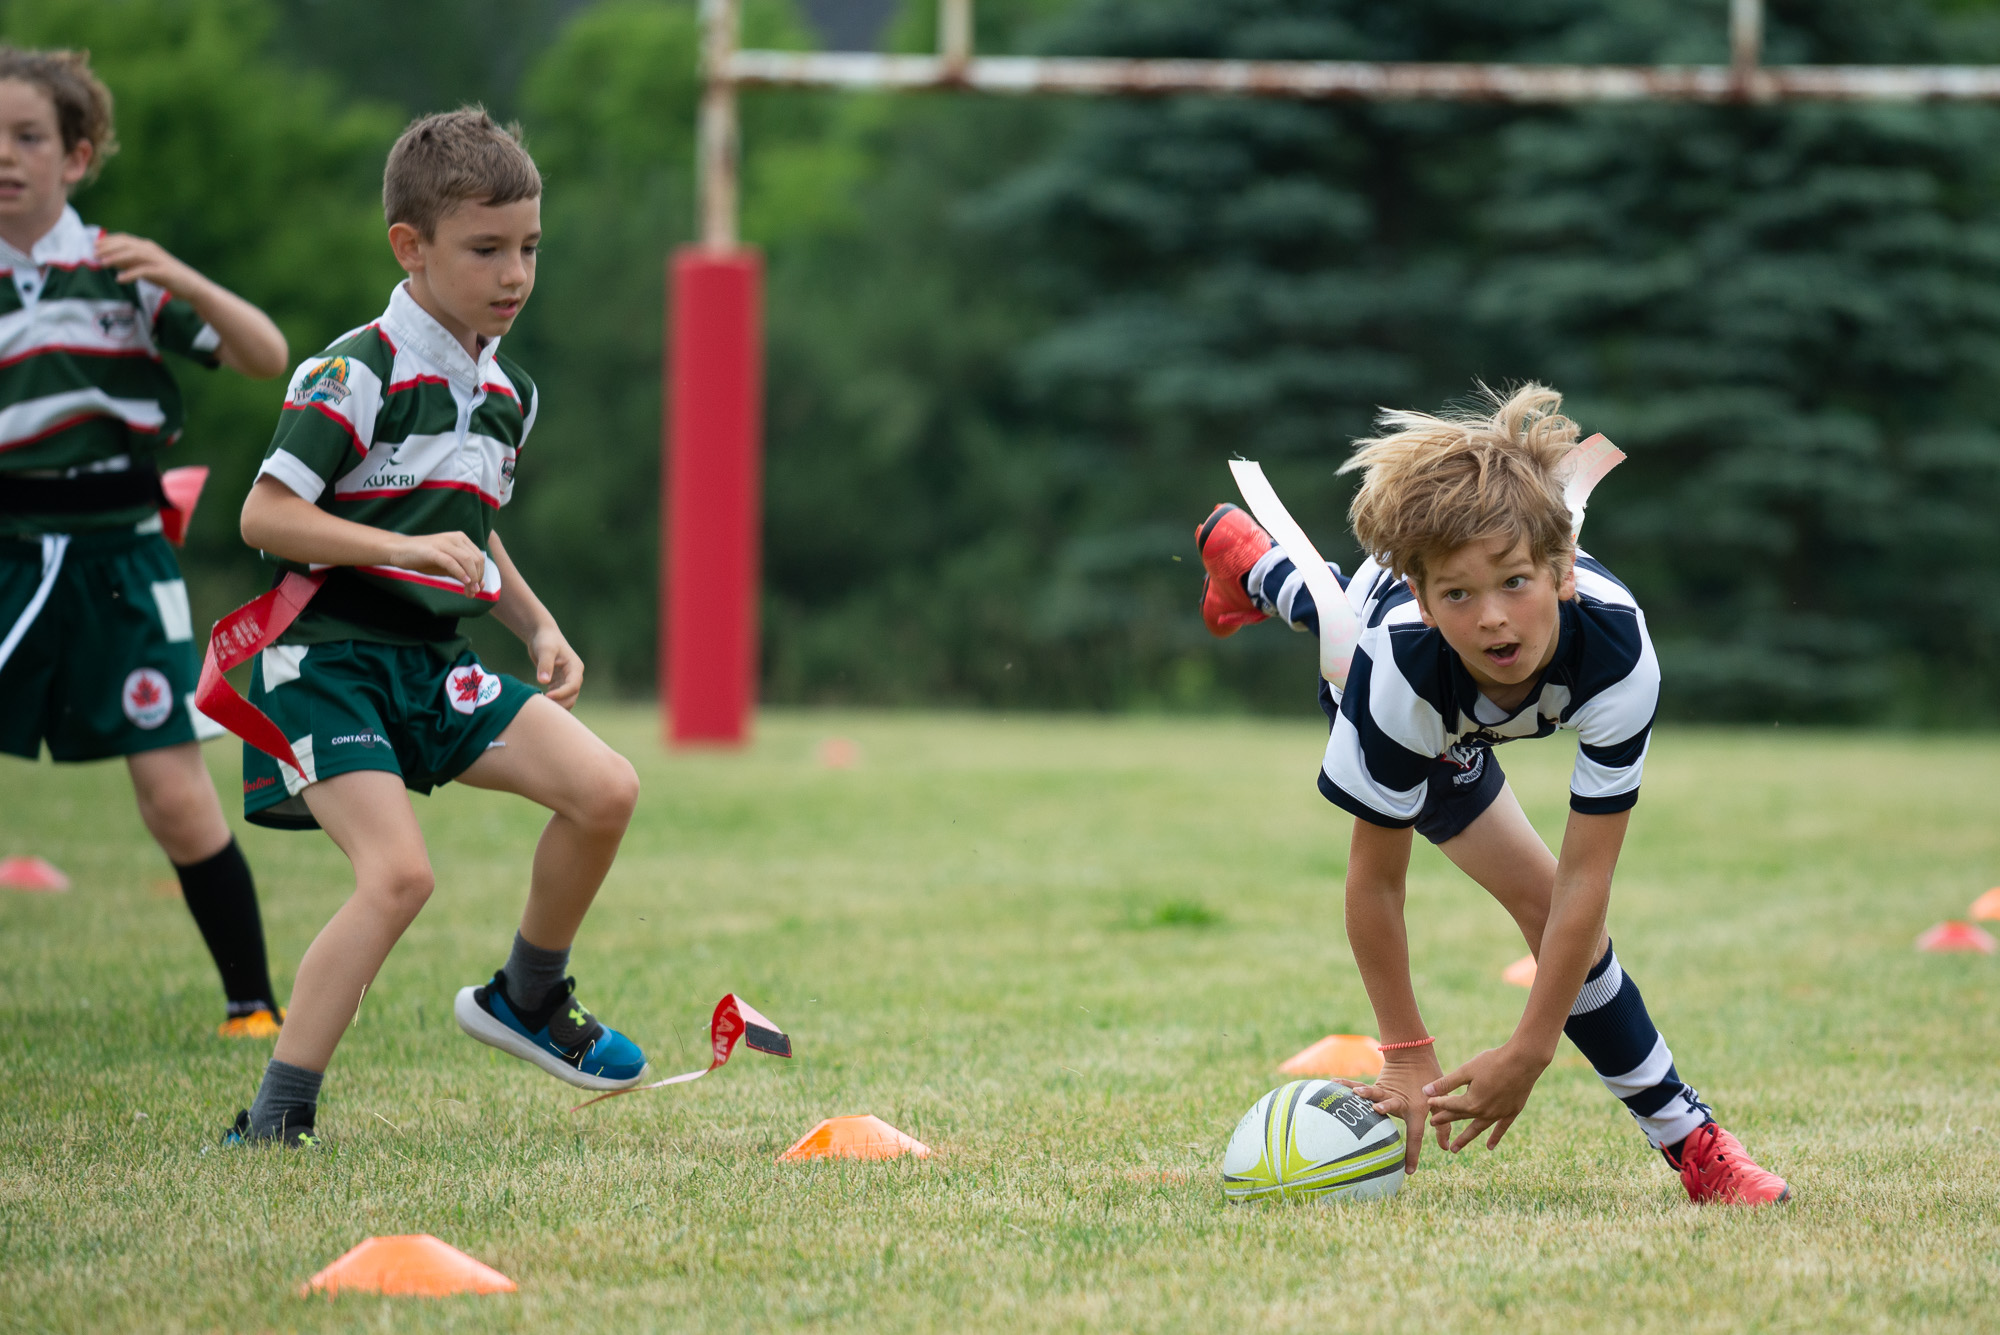 Young male rugby player running with the ball